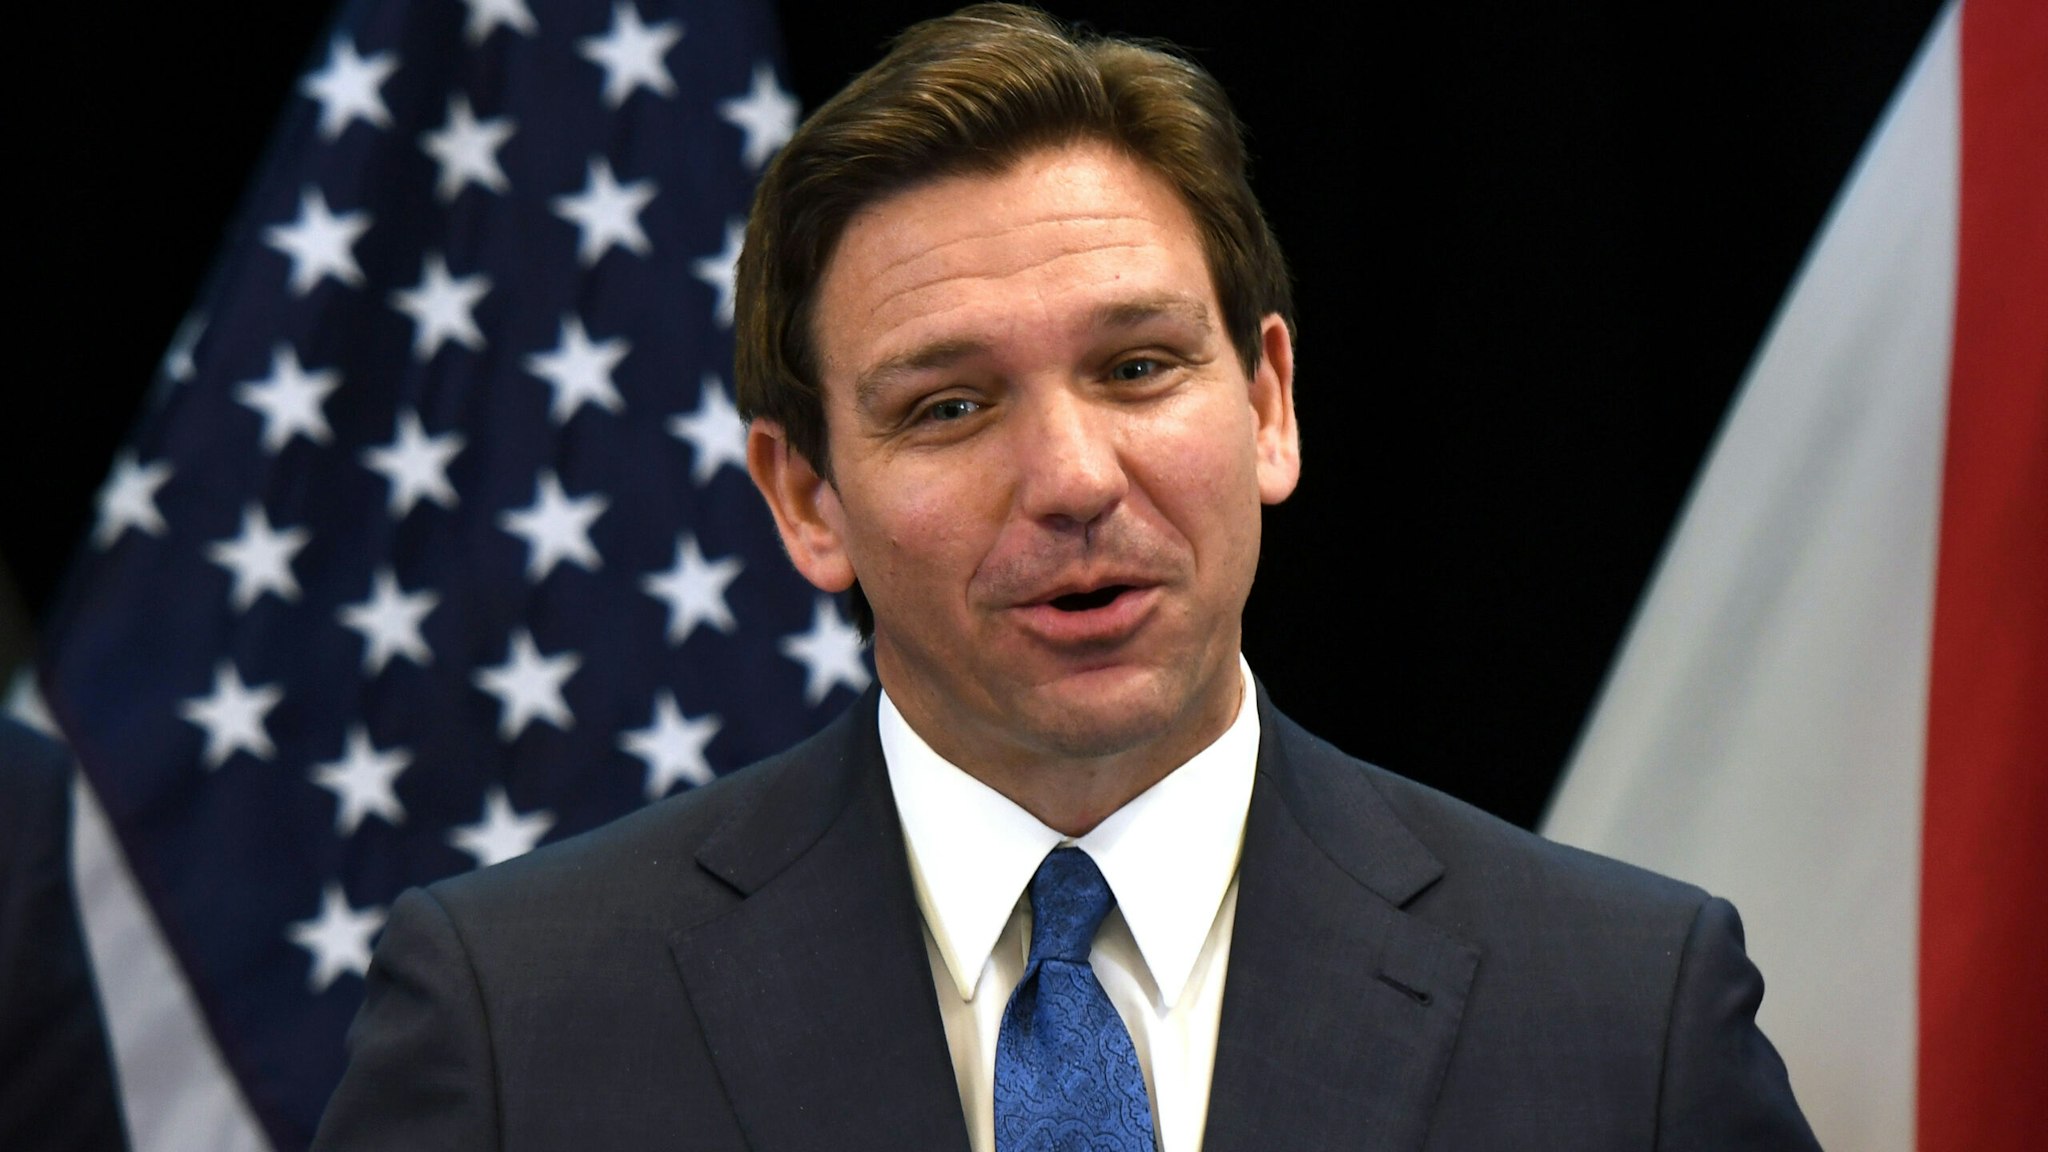 LAKE BUENA VISTA, FLORIDA, UNITED STATES - 2023/04/17: Florida Governor Ron DeSantis holds a press conference at the Reedy Creek Administration Building in Lake Buena Vista. DeSantis announced legislative action to nullify the agreement between the Reedy Creek Improvement District and Walt Disney World which was designed to permit Disney to retain control of its theme park and surrounding property.